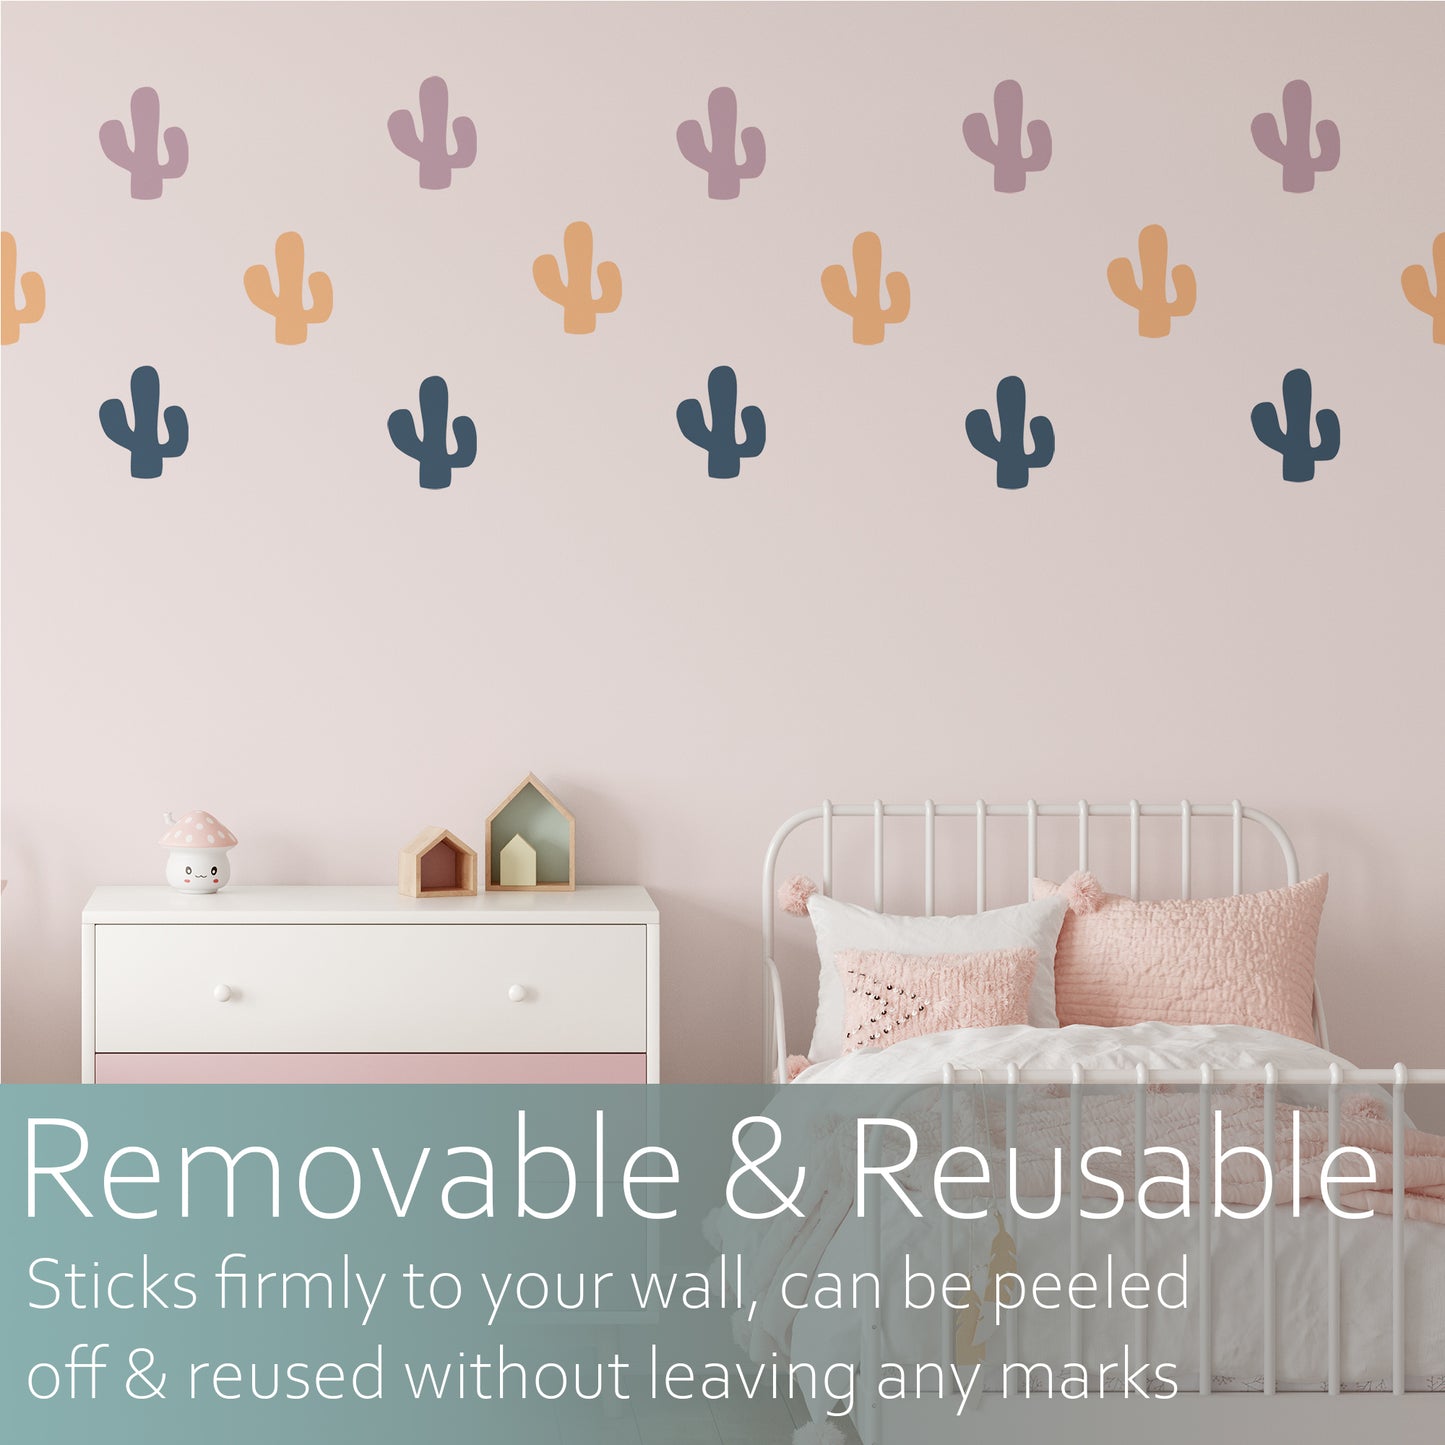 Cacti | Fabric wall stickers